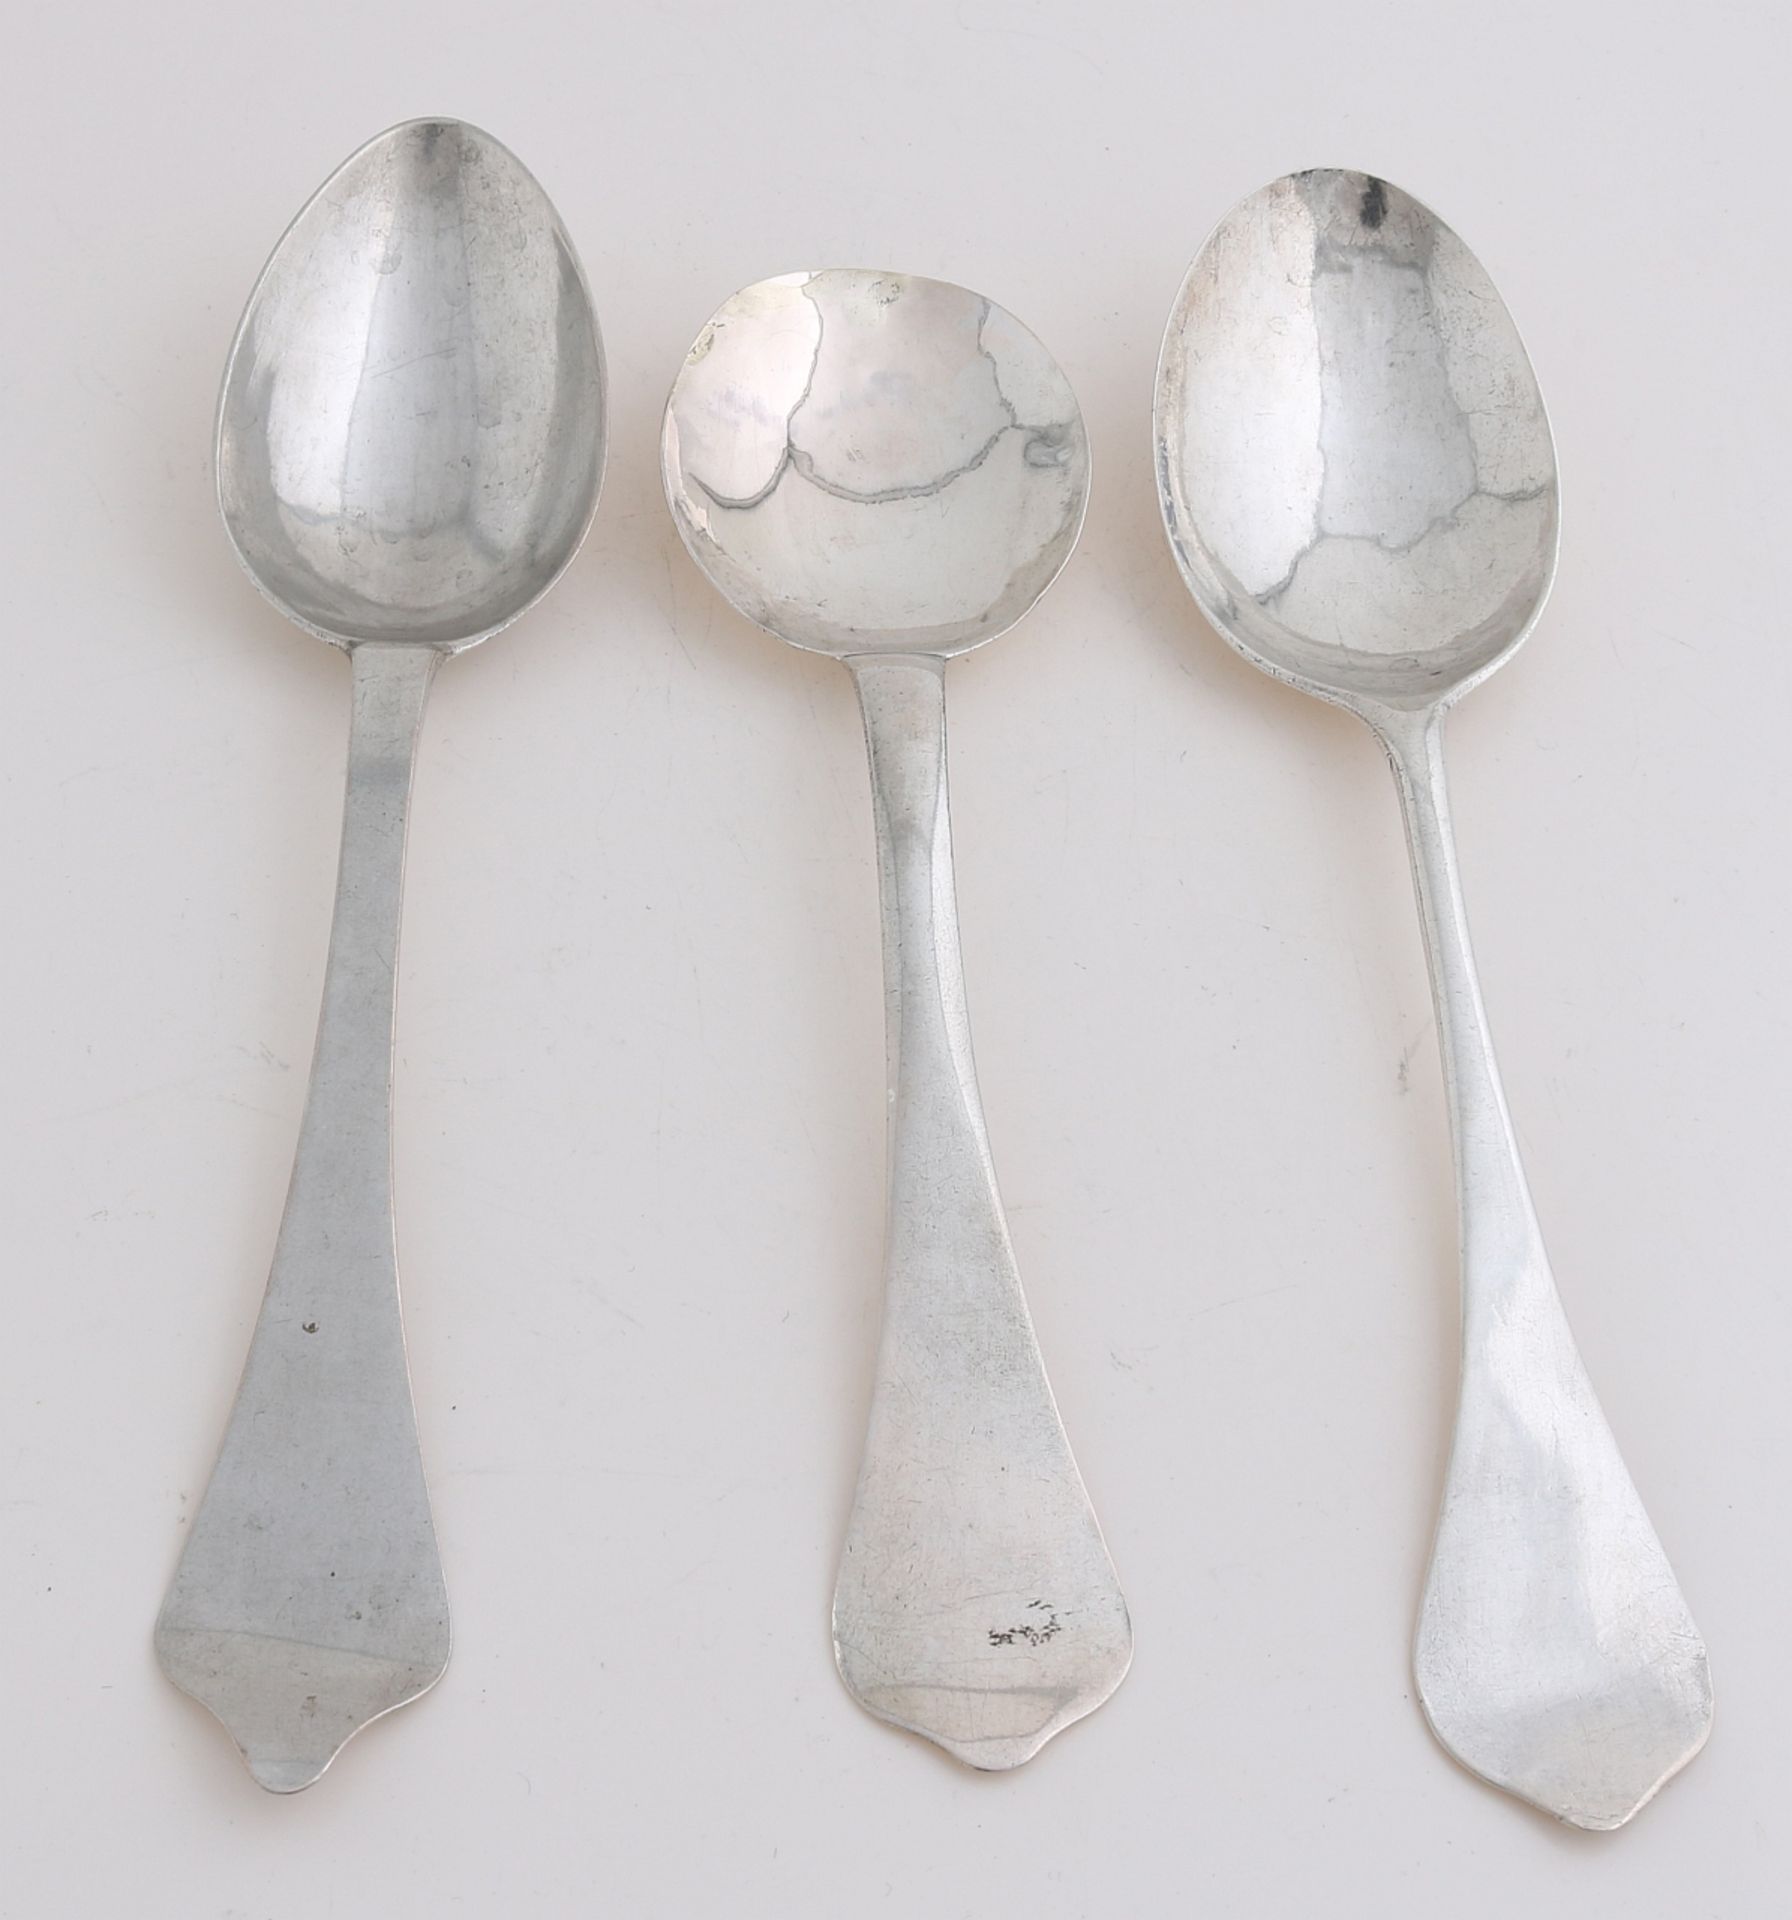 3 18th century silver spoons